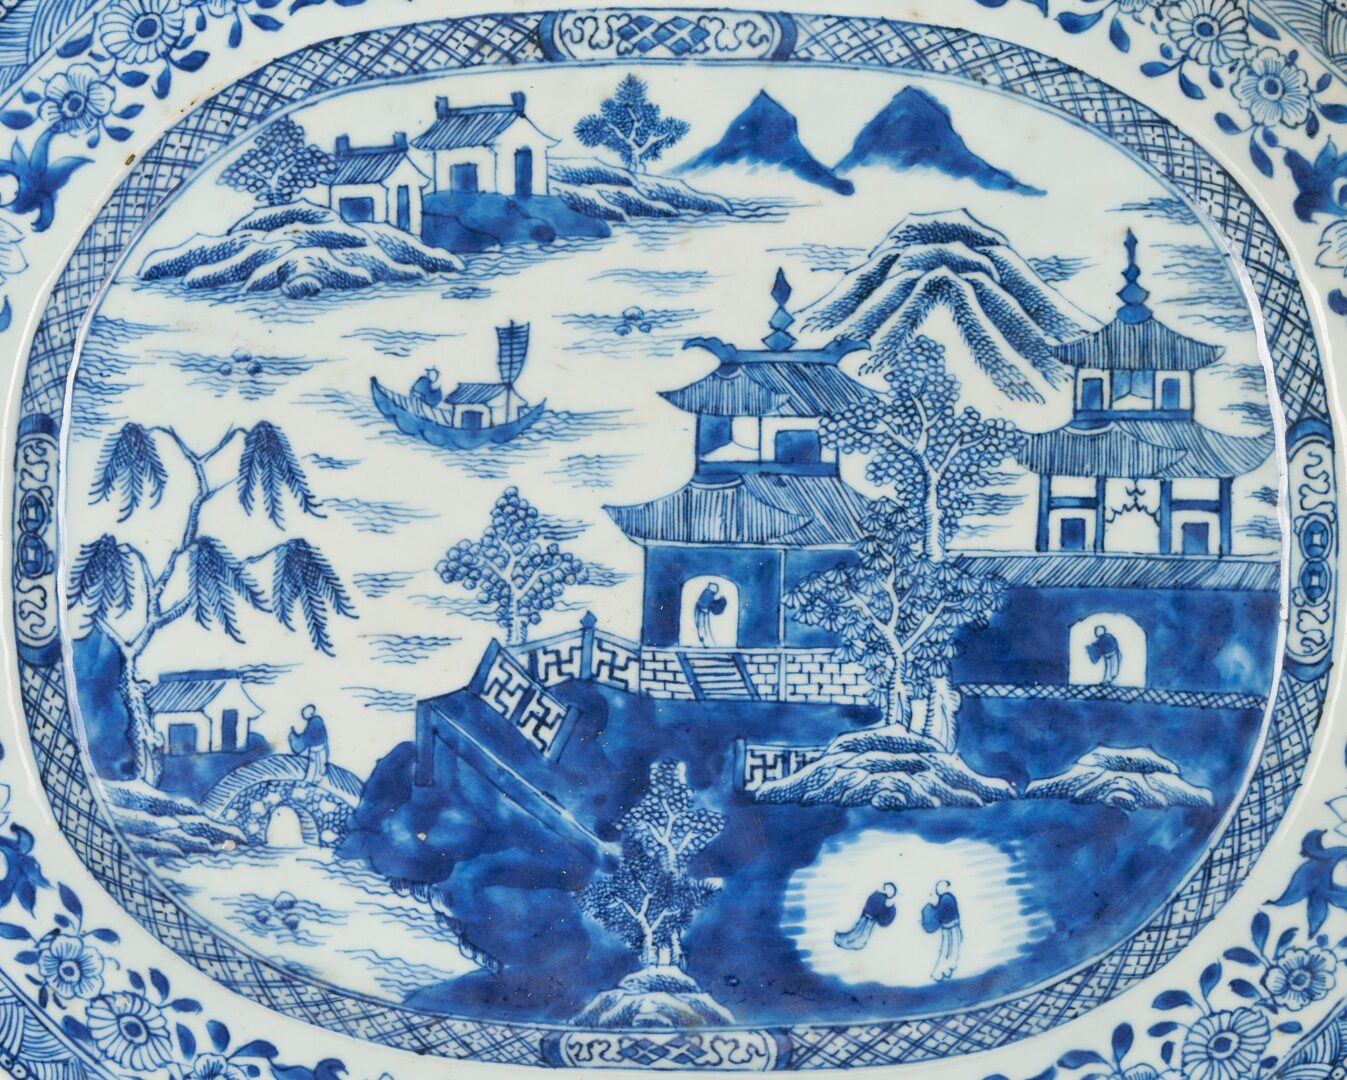 Lot 6: Pair of Chinese Export Porcelain Platters